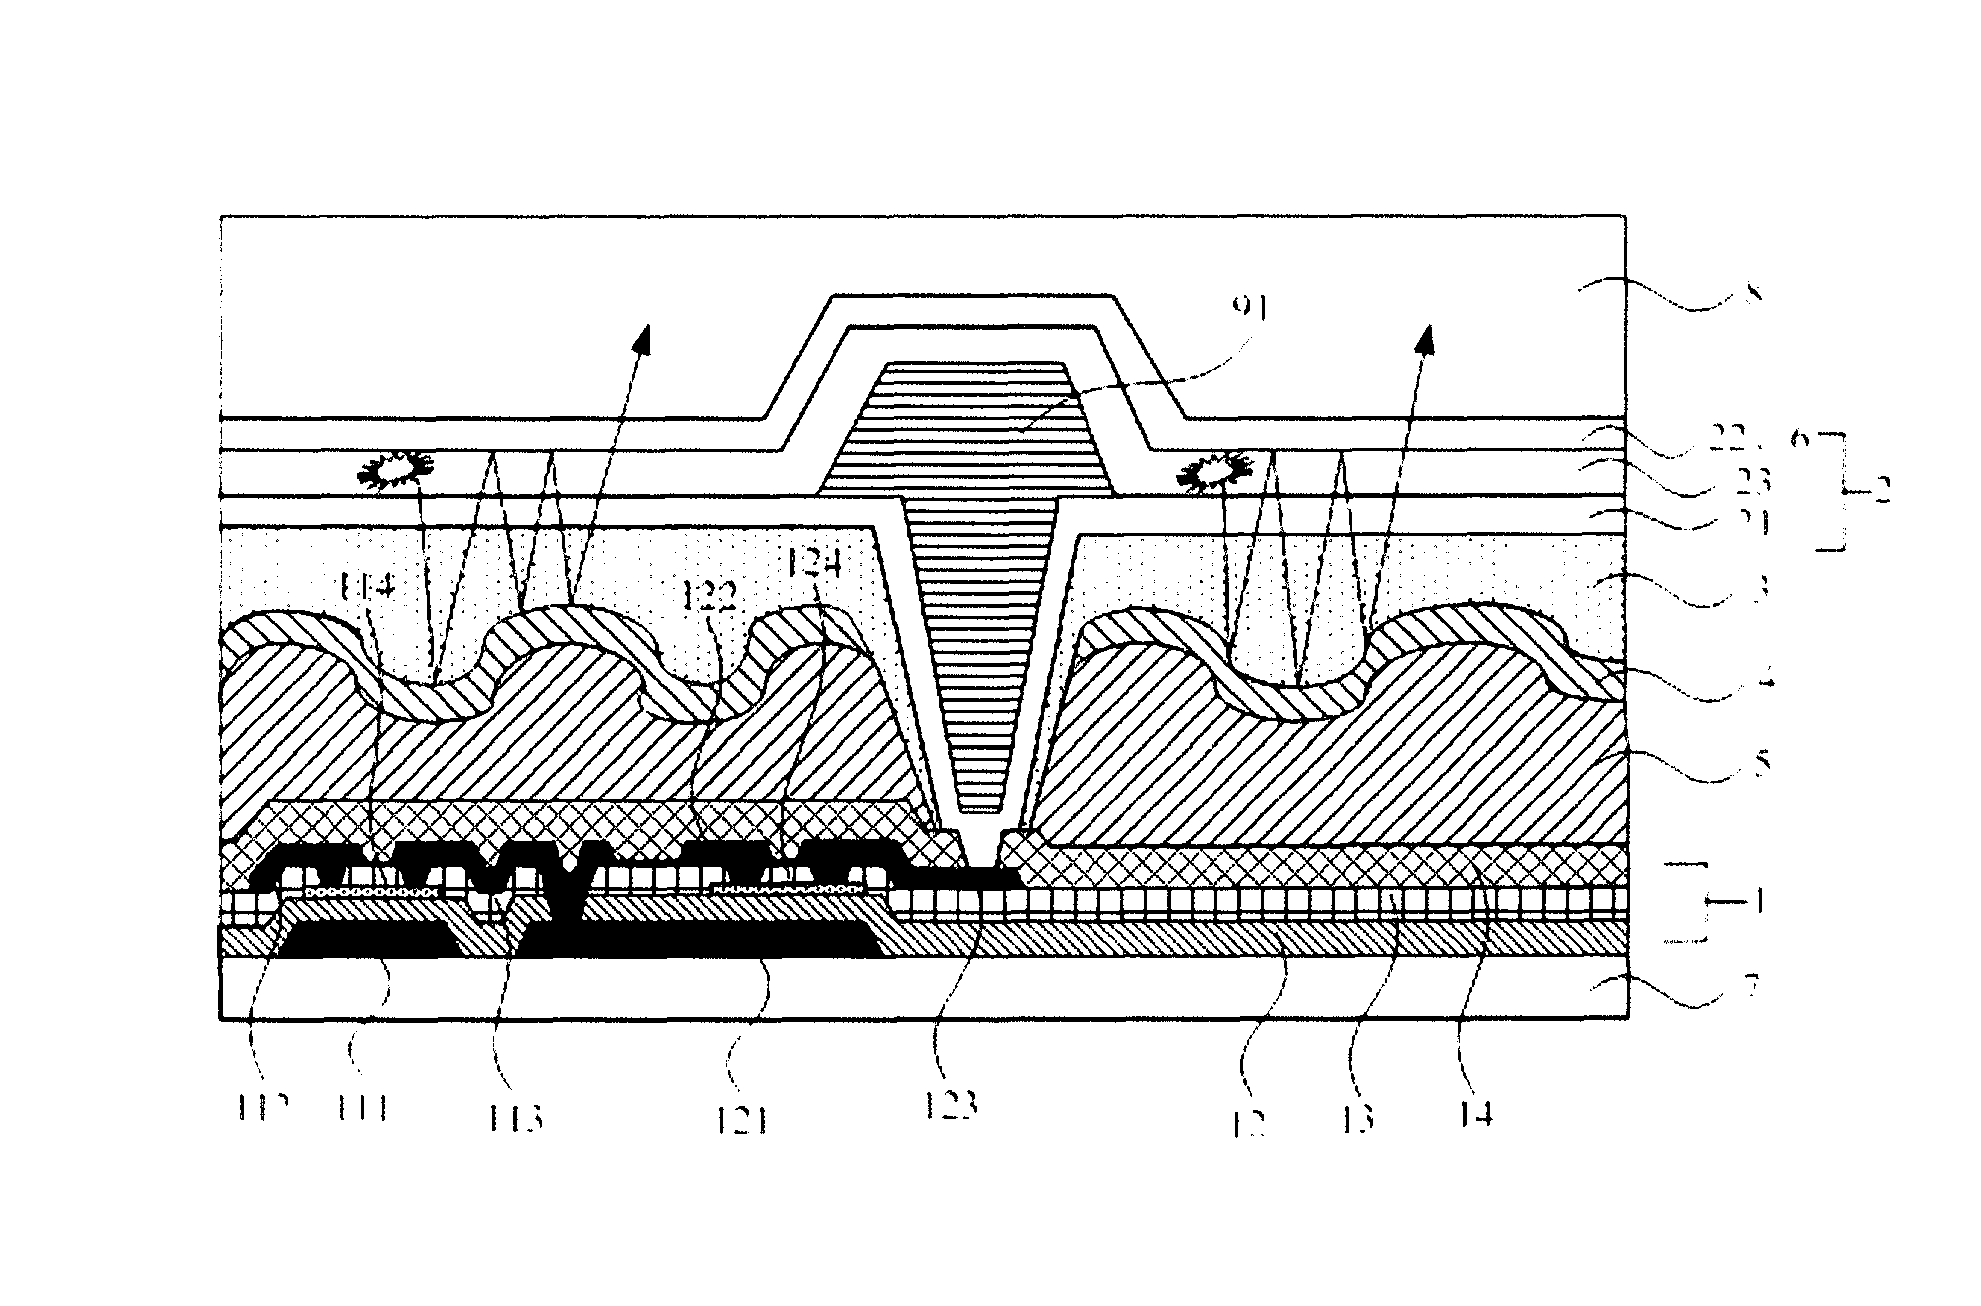 Array substrate, method for fabricating the same, and OLED display device